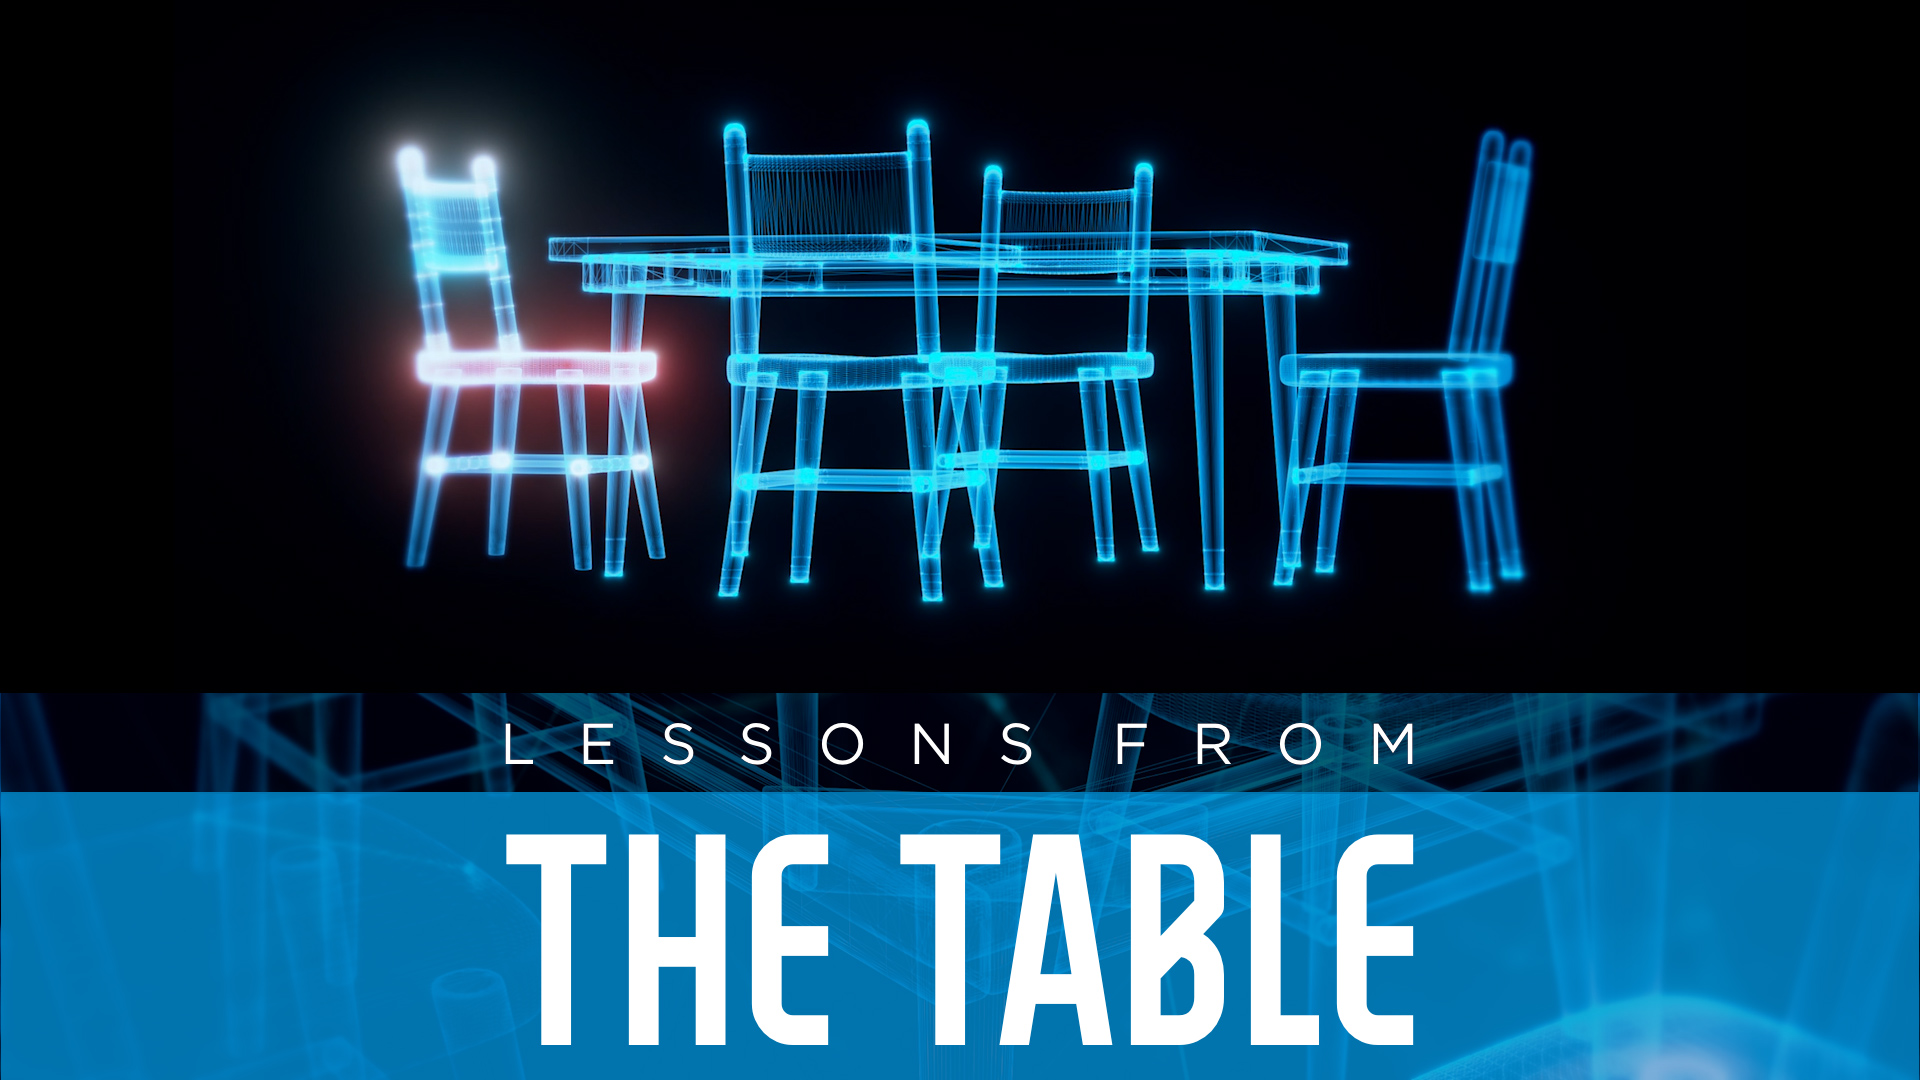 THE TABLE: A Culture of Invitation